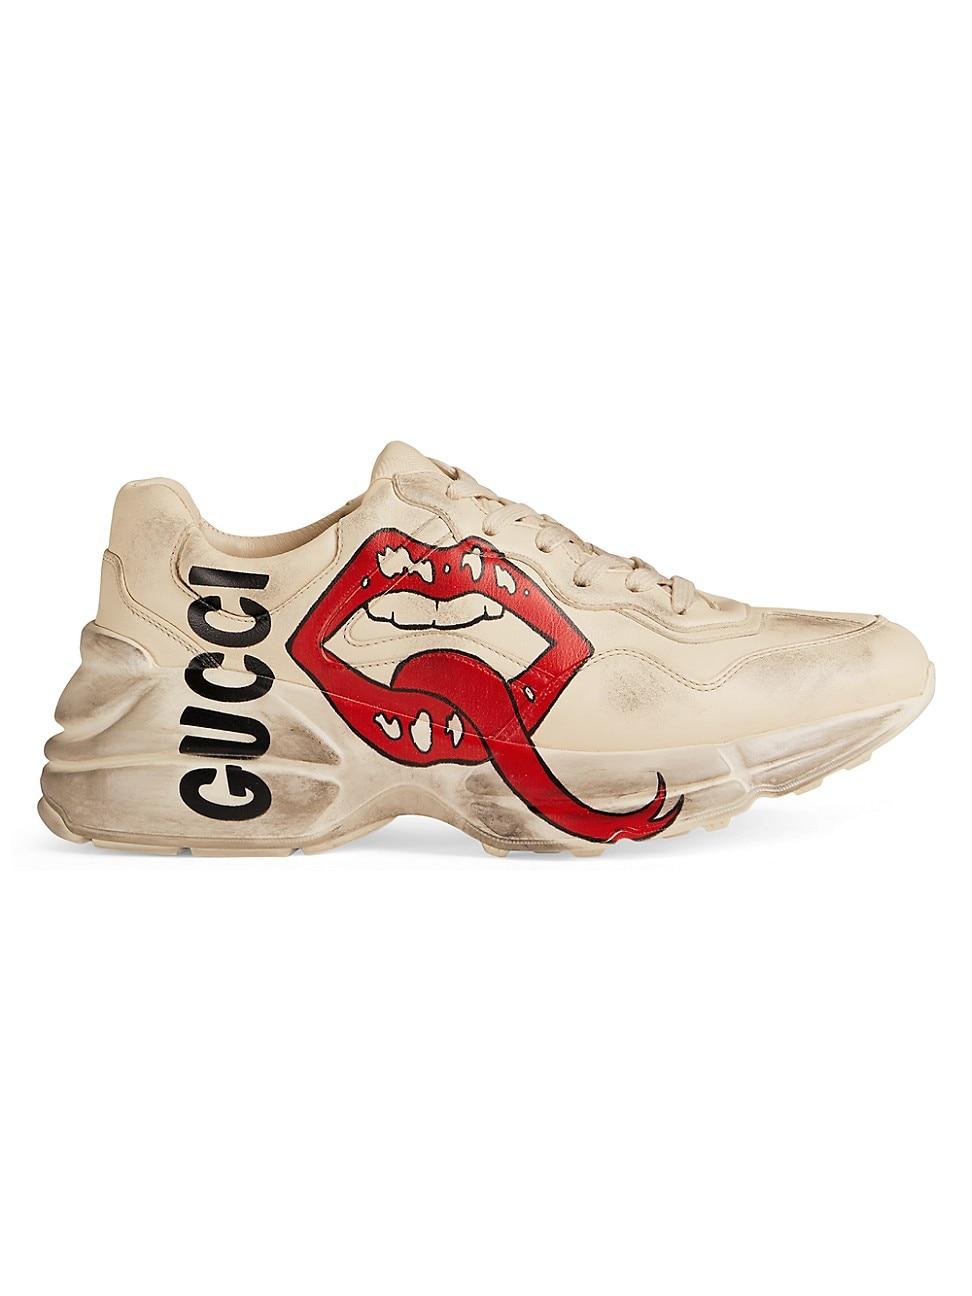 Gucci Rhyton Leather Sneakers With Maxi Mouth Print in Ivory (White) - Save  24% - Lyst